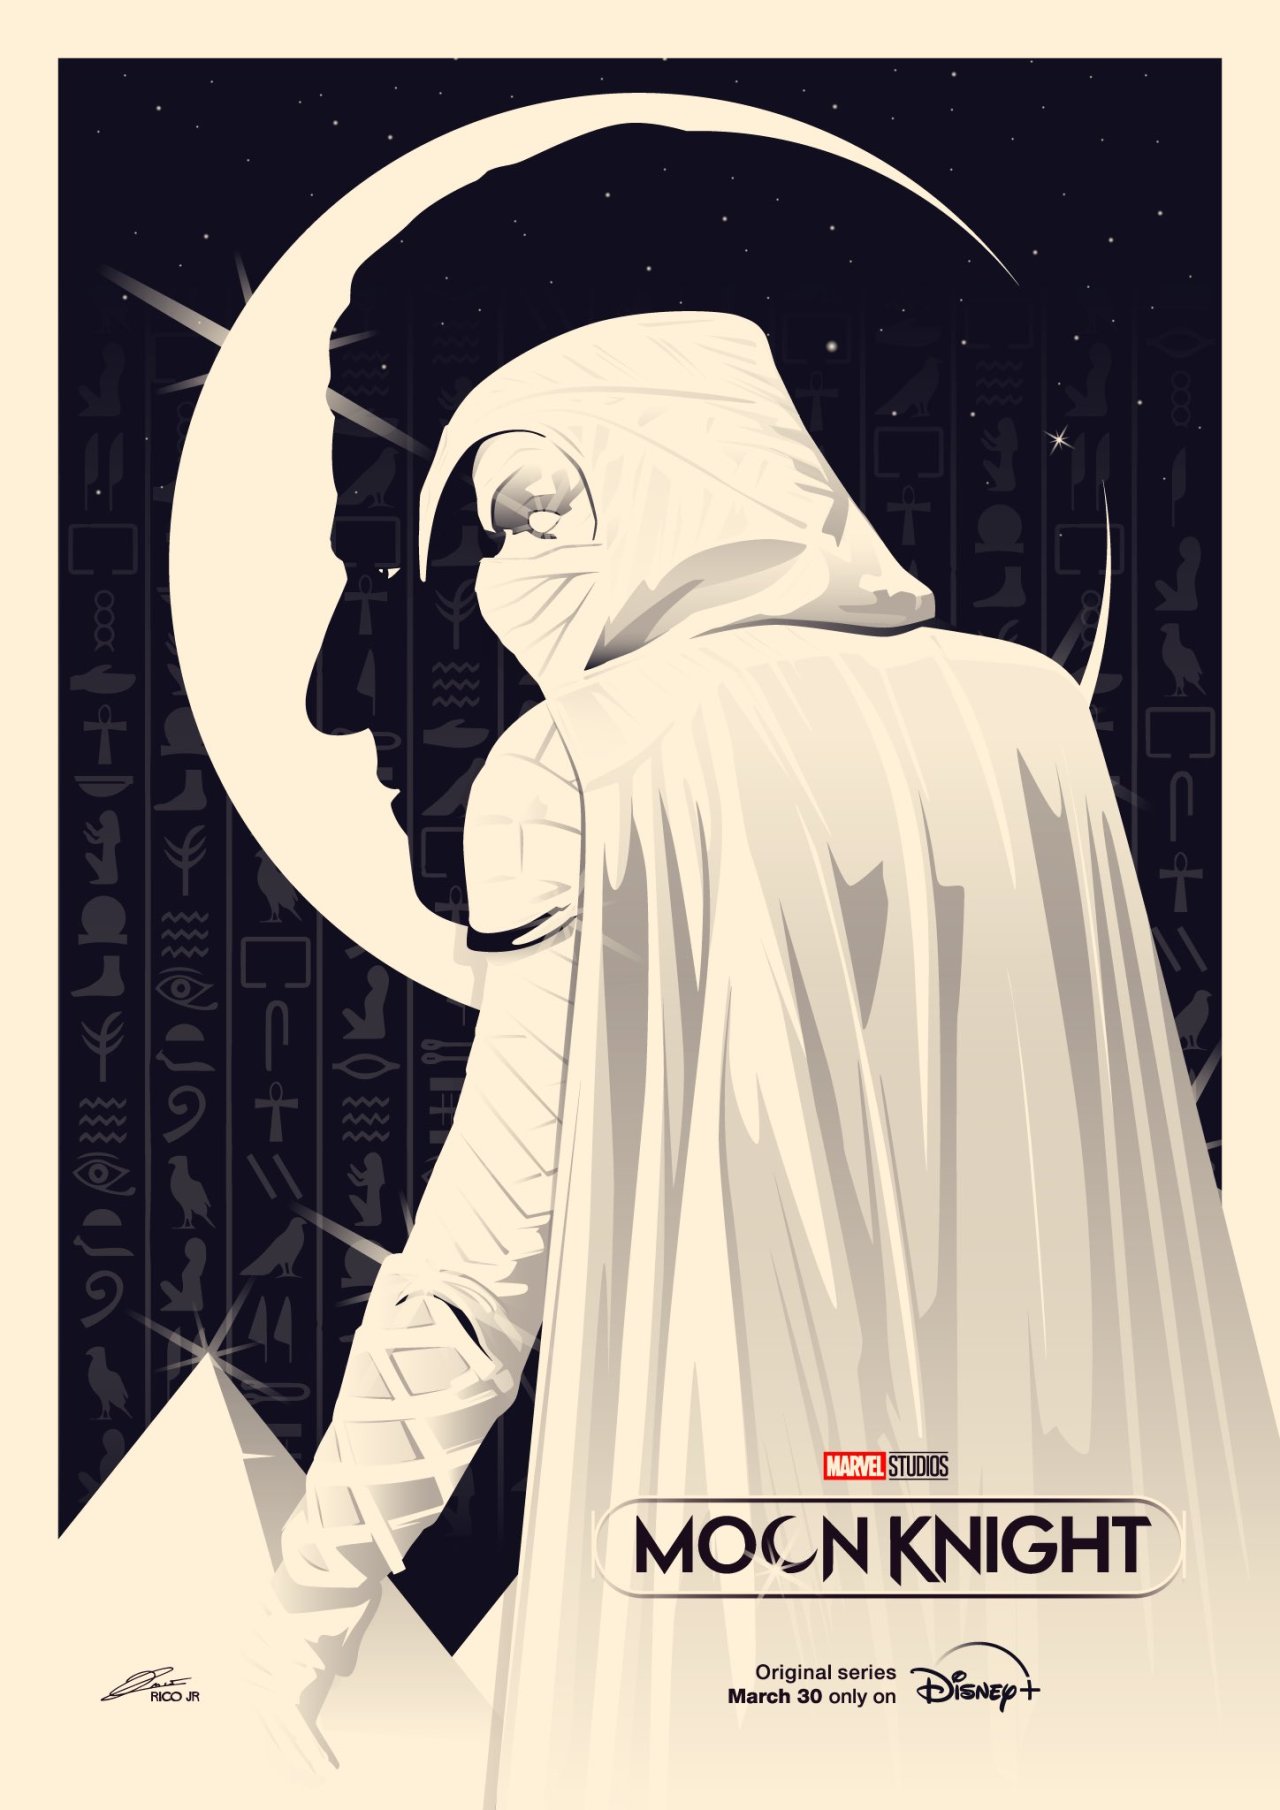 Moon Knight Review: Marvel's Slow Paced Standalone TV Show